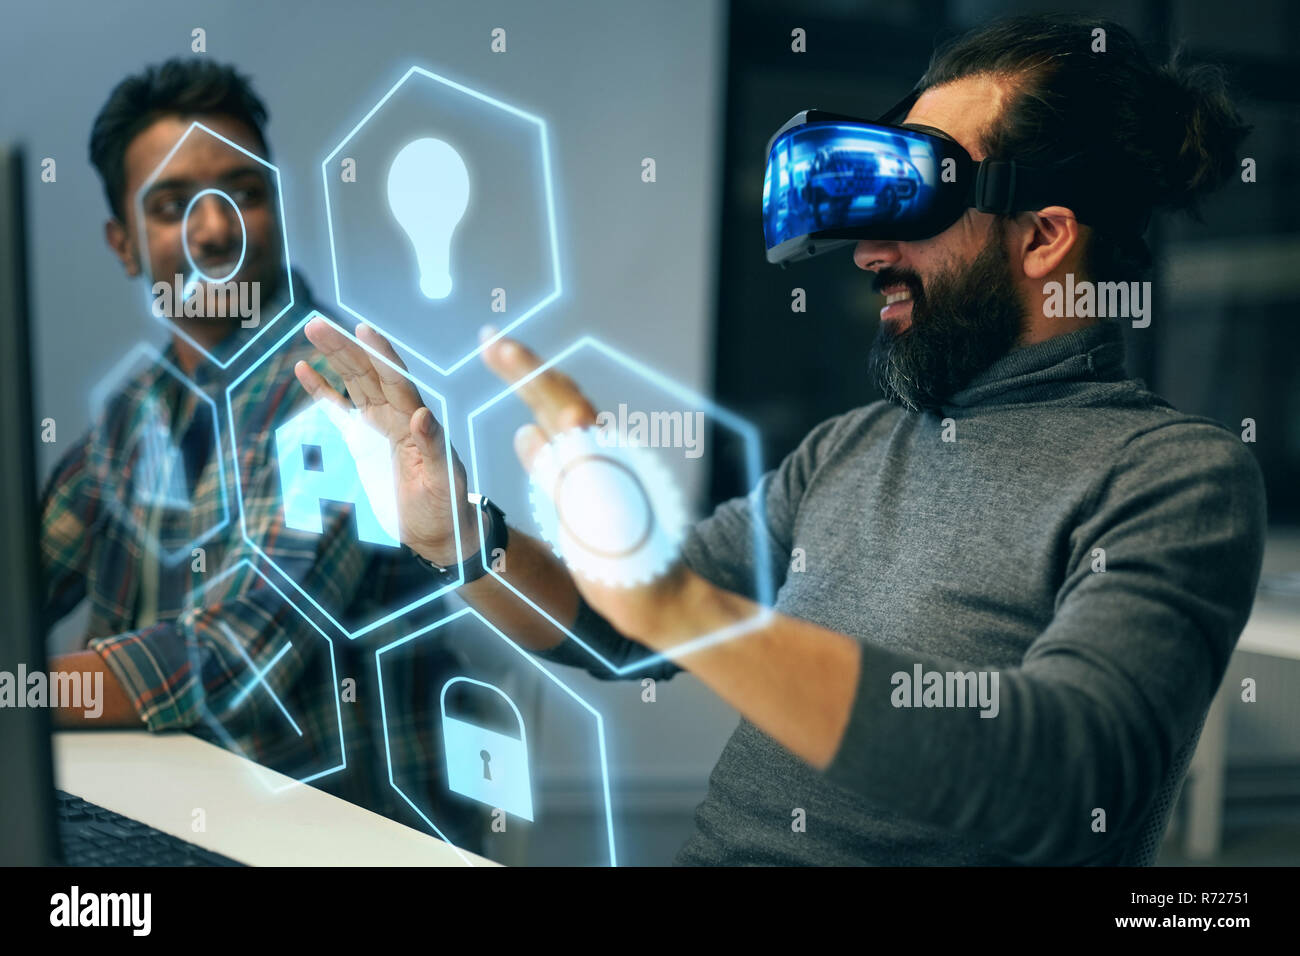 man in vr headset with virtual interface at office Stock Photo